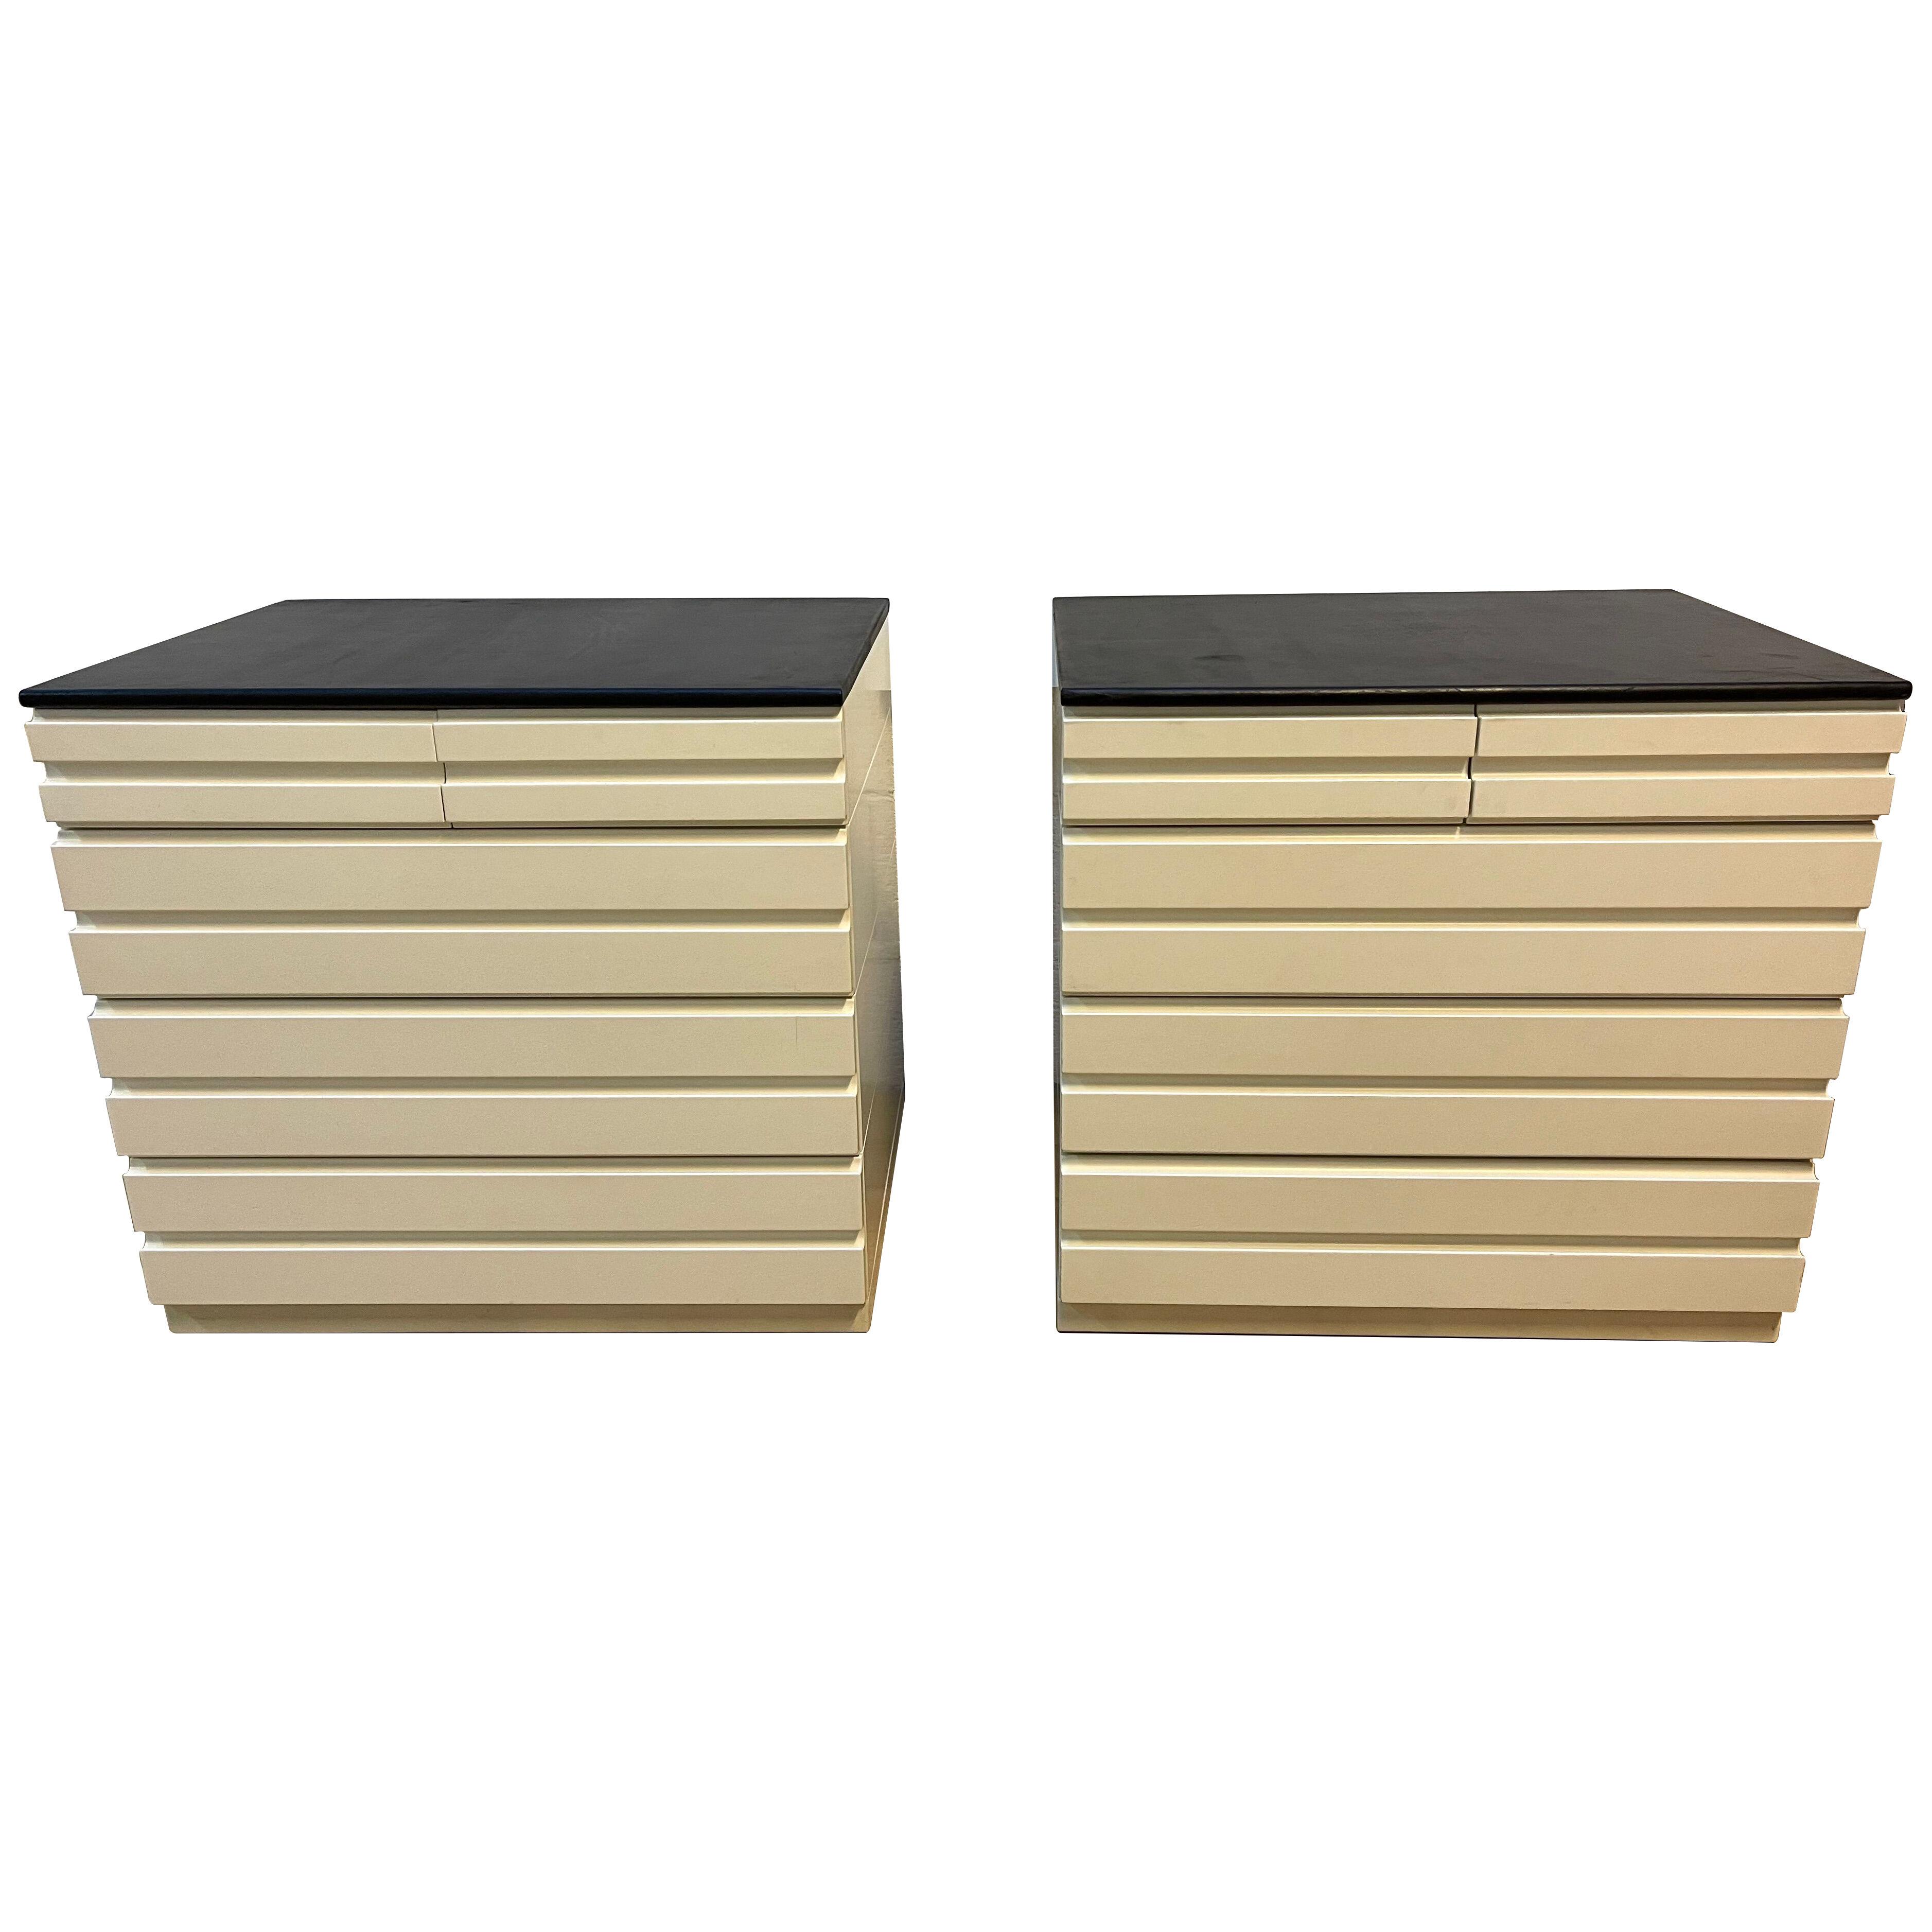 Pair of Samarcanda Chest of Drawers by Vico Magistretti. Italy, 1970s